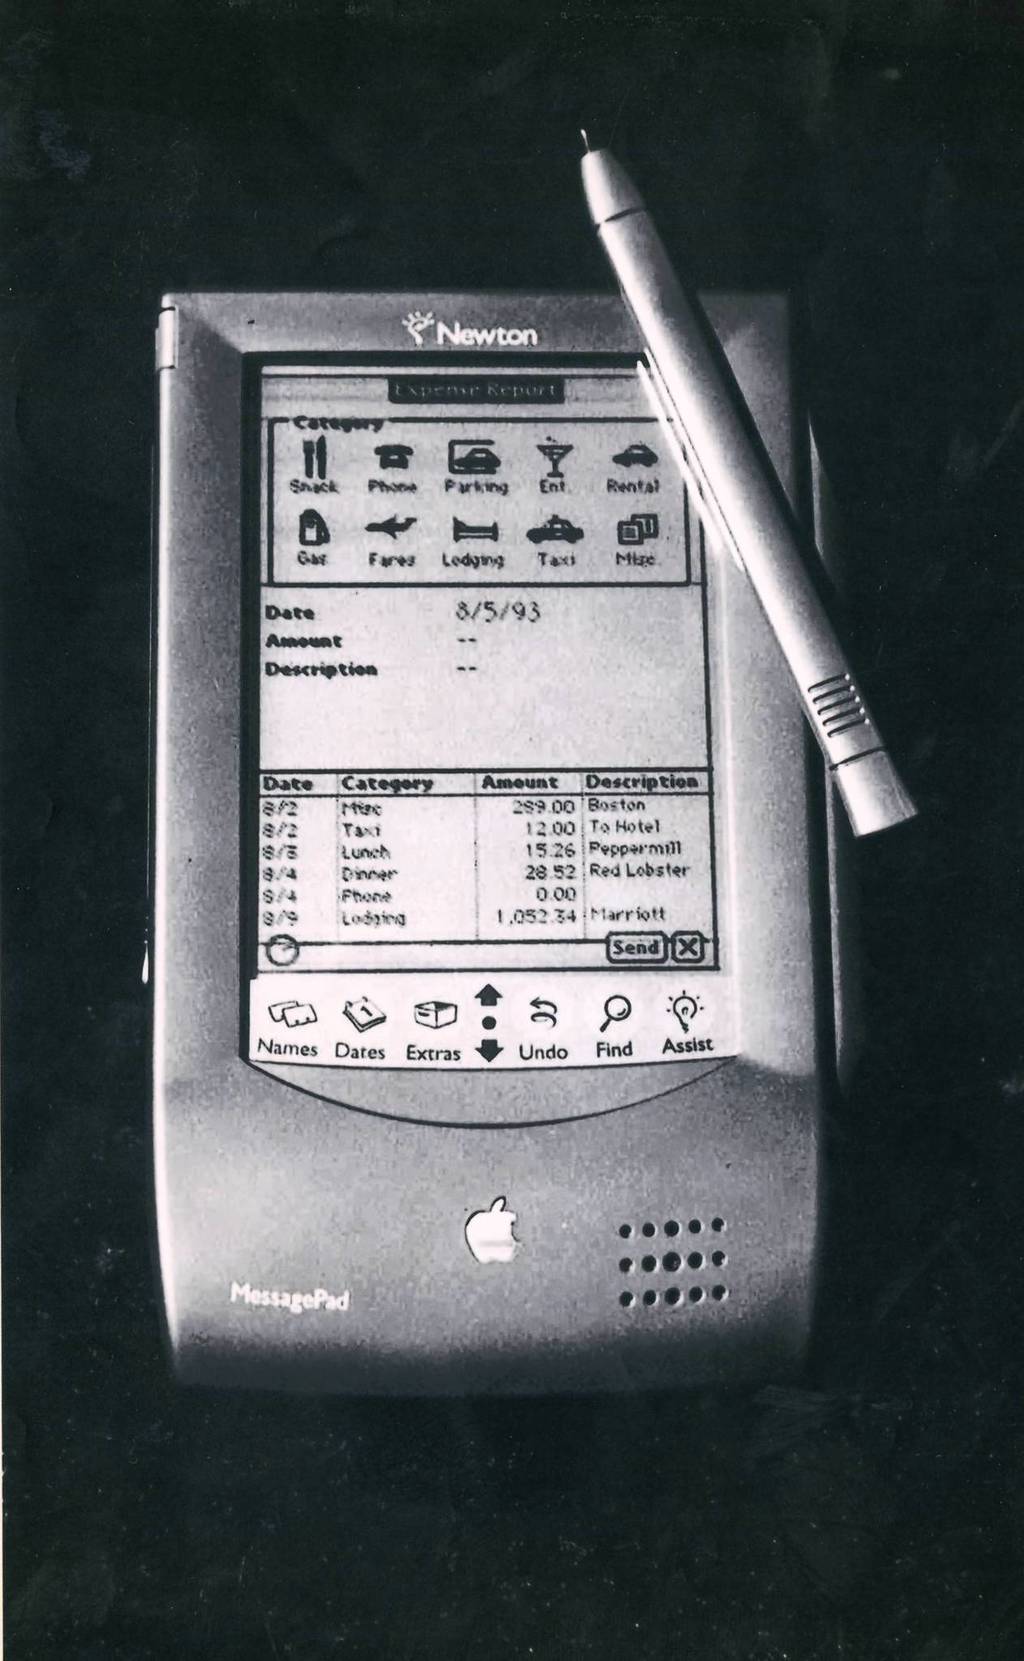 Apple's newest foray into personal electronics in 1993 was the Newton, a personal digital assistant using pen-based technology.